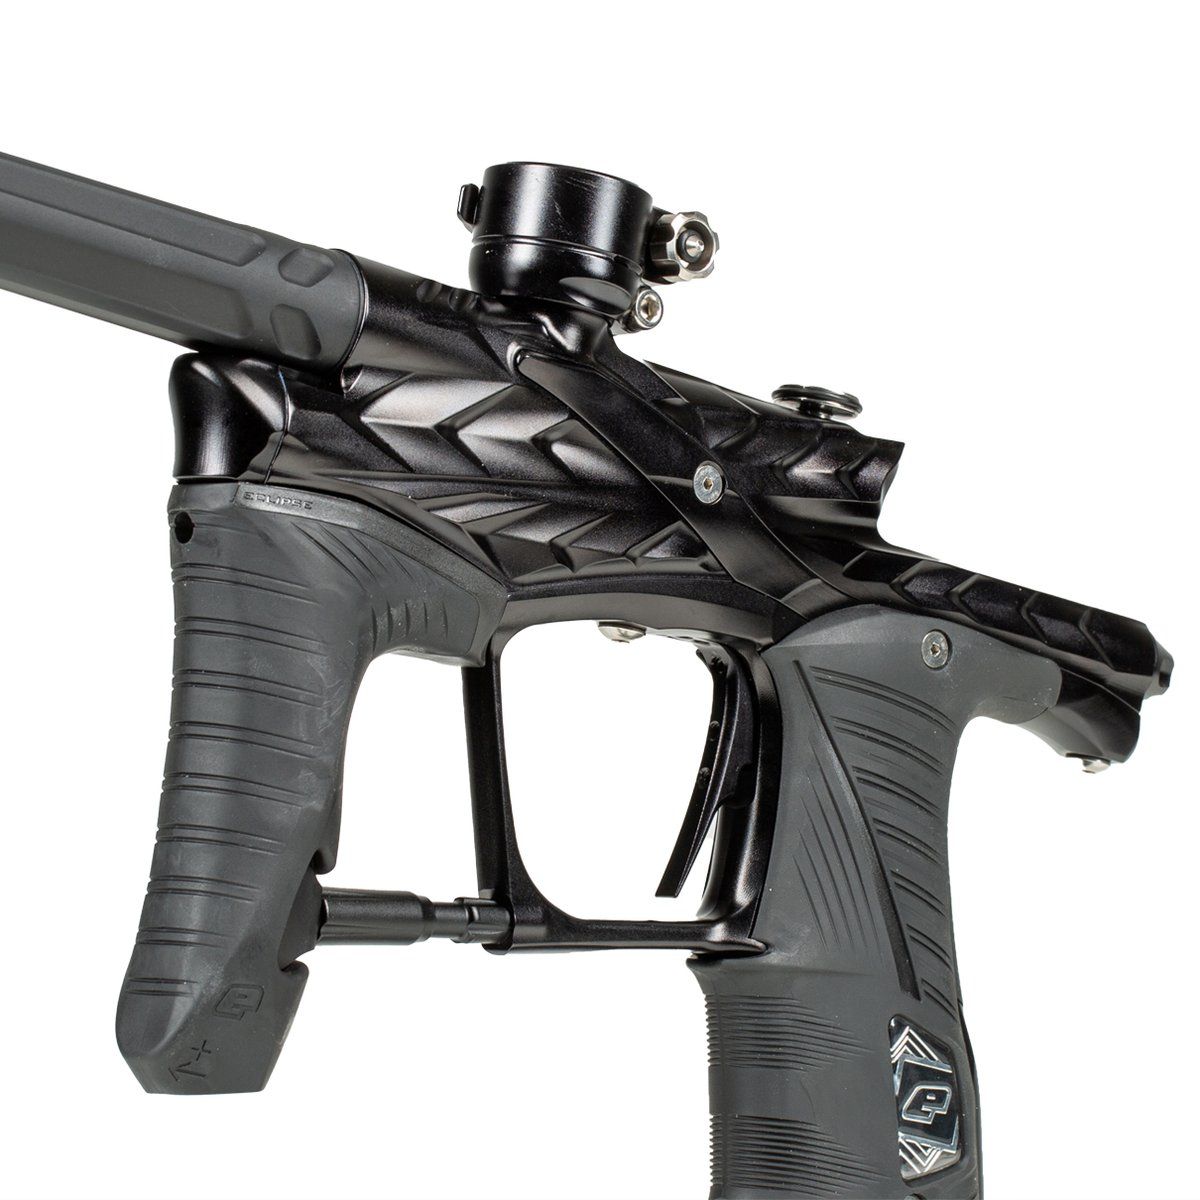 Planet Eclipse Ego LV1.5 Paintball Marker Overview & Efficiency